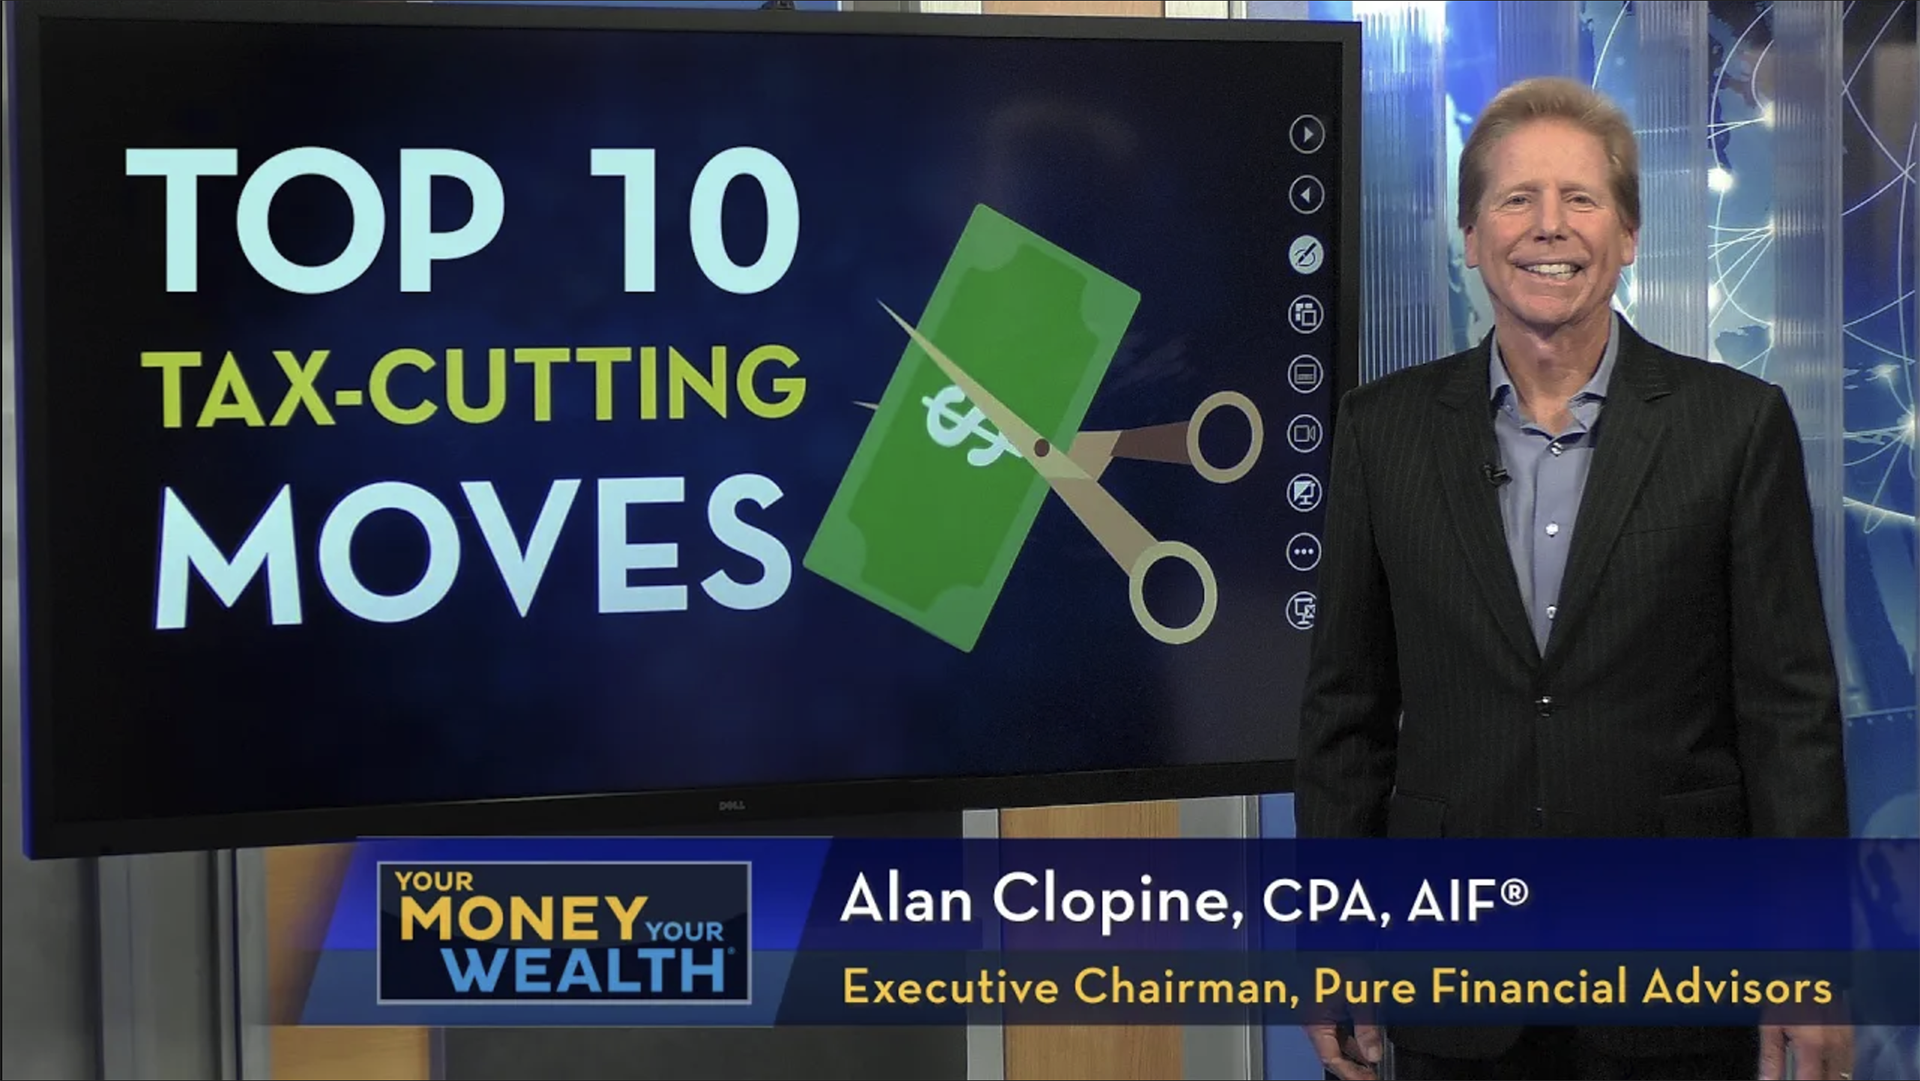 10 Tax-Cutting Moves to Make Now | Year-End Tax Planning - Your Money, Your Wealth® TV - S9 | E14